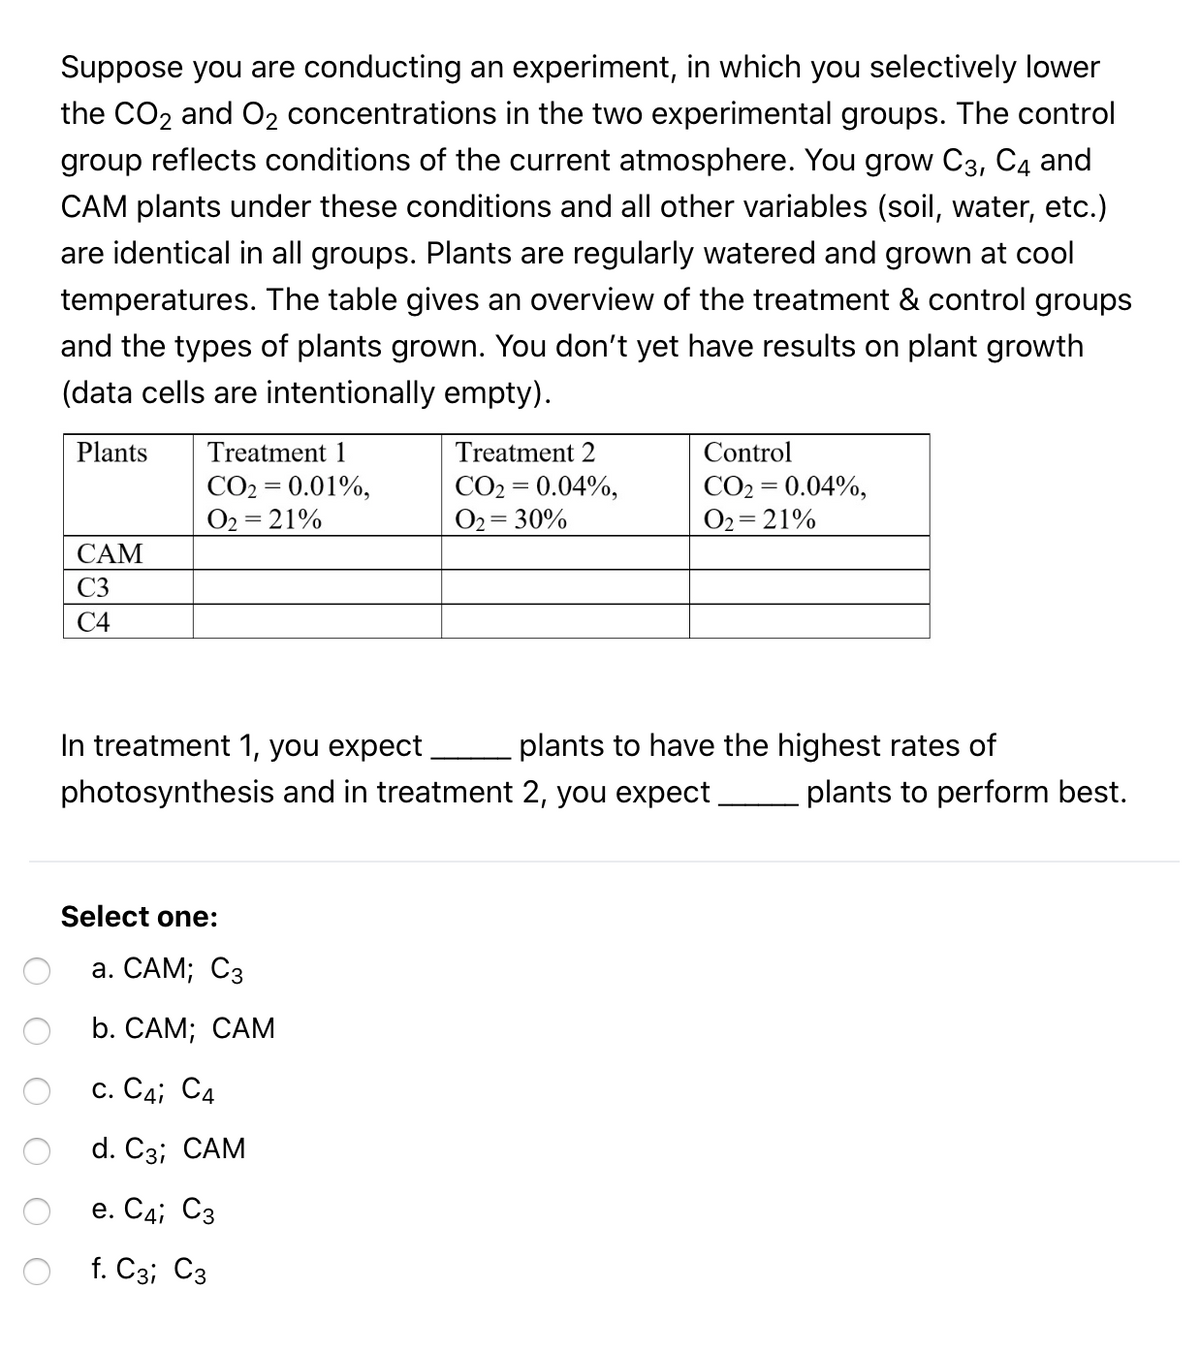 Suppose you are conducting an experiment, in which you selectively lower
the CO2 and O2 concentrations in the two experimental groups. The control
group reflects conditions of the current atmosphere. You grow C3, C4 and
CAM plants under these conditions and all other variables (soil, water, etc.)
are identical in all groups. Plants are regularly watered and grown at cool
temperatures. The table gives an overview of the treatment & control groups
and the types of plants grown. You don't yet have results on plant growth
(data cells are intentionally empty).
Plants
Treatment 1
Treatment 2
Control
CO2 = 0.01%,
O2 = 21%
CO2 = 0.04%,
O2= 30%
CO2 = 0.04%,
O2= 21%
CAM
C3
С4
In treatment 1, you expect
plants to have the highest rates of
photosynthesis and in treatment 2, you expect
plants to perform best.
Select one:
а. САМ;B Сз
b. САМ; САМ
с. Сд;B Сд
d. C3; САМ
е. Сд; Сз
f. C3; C3
